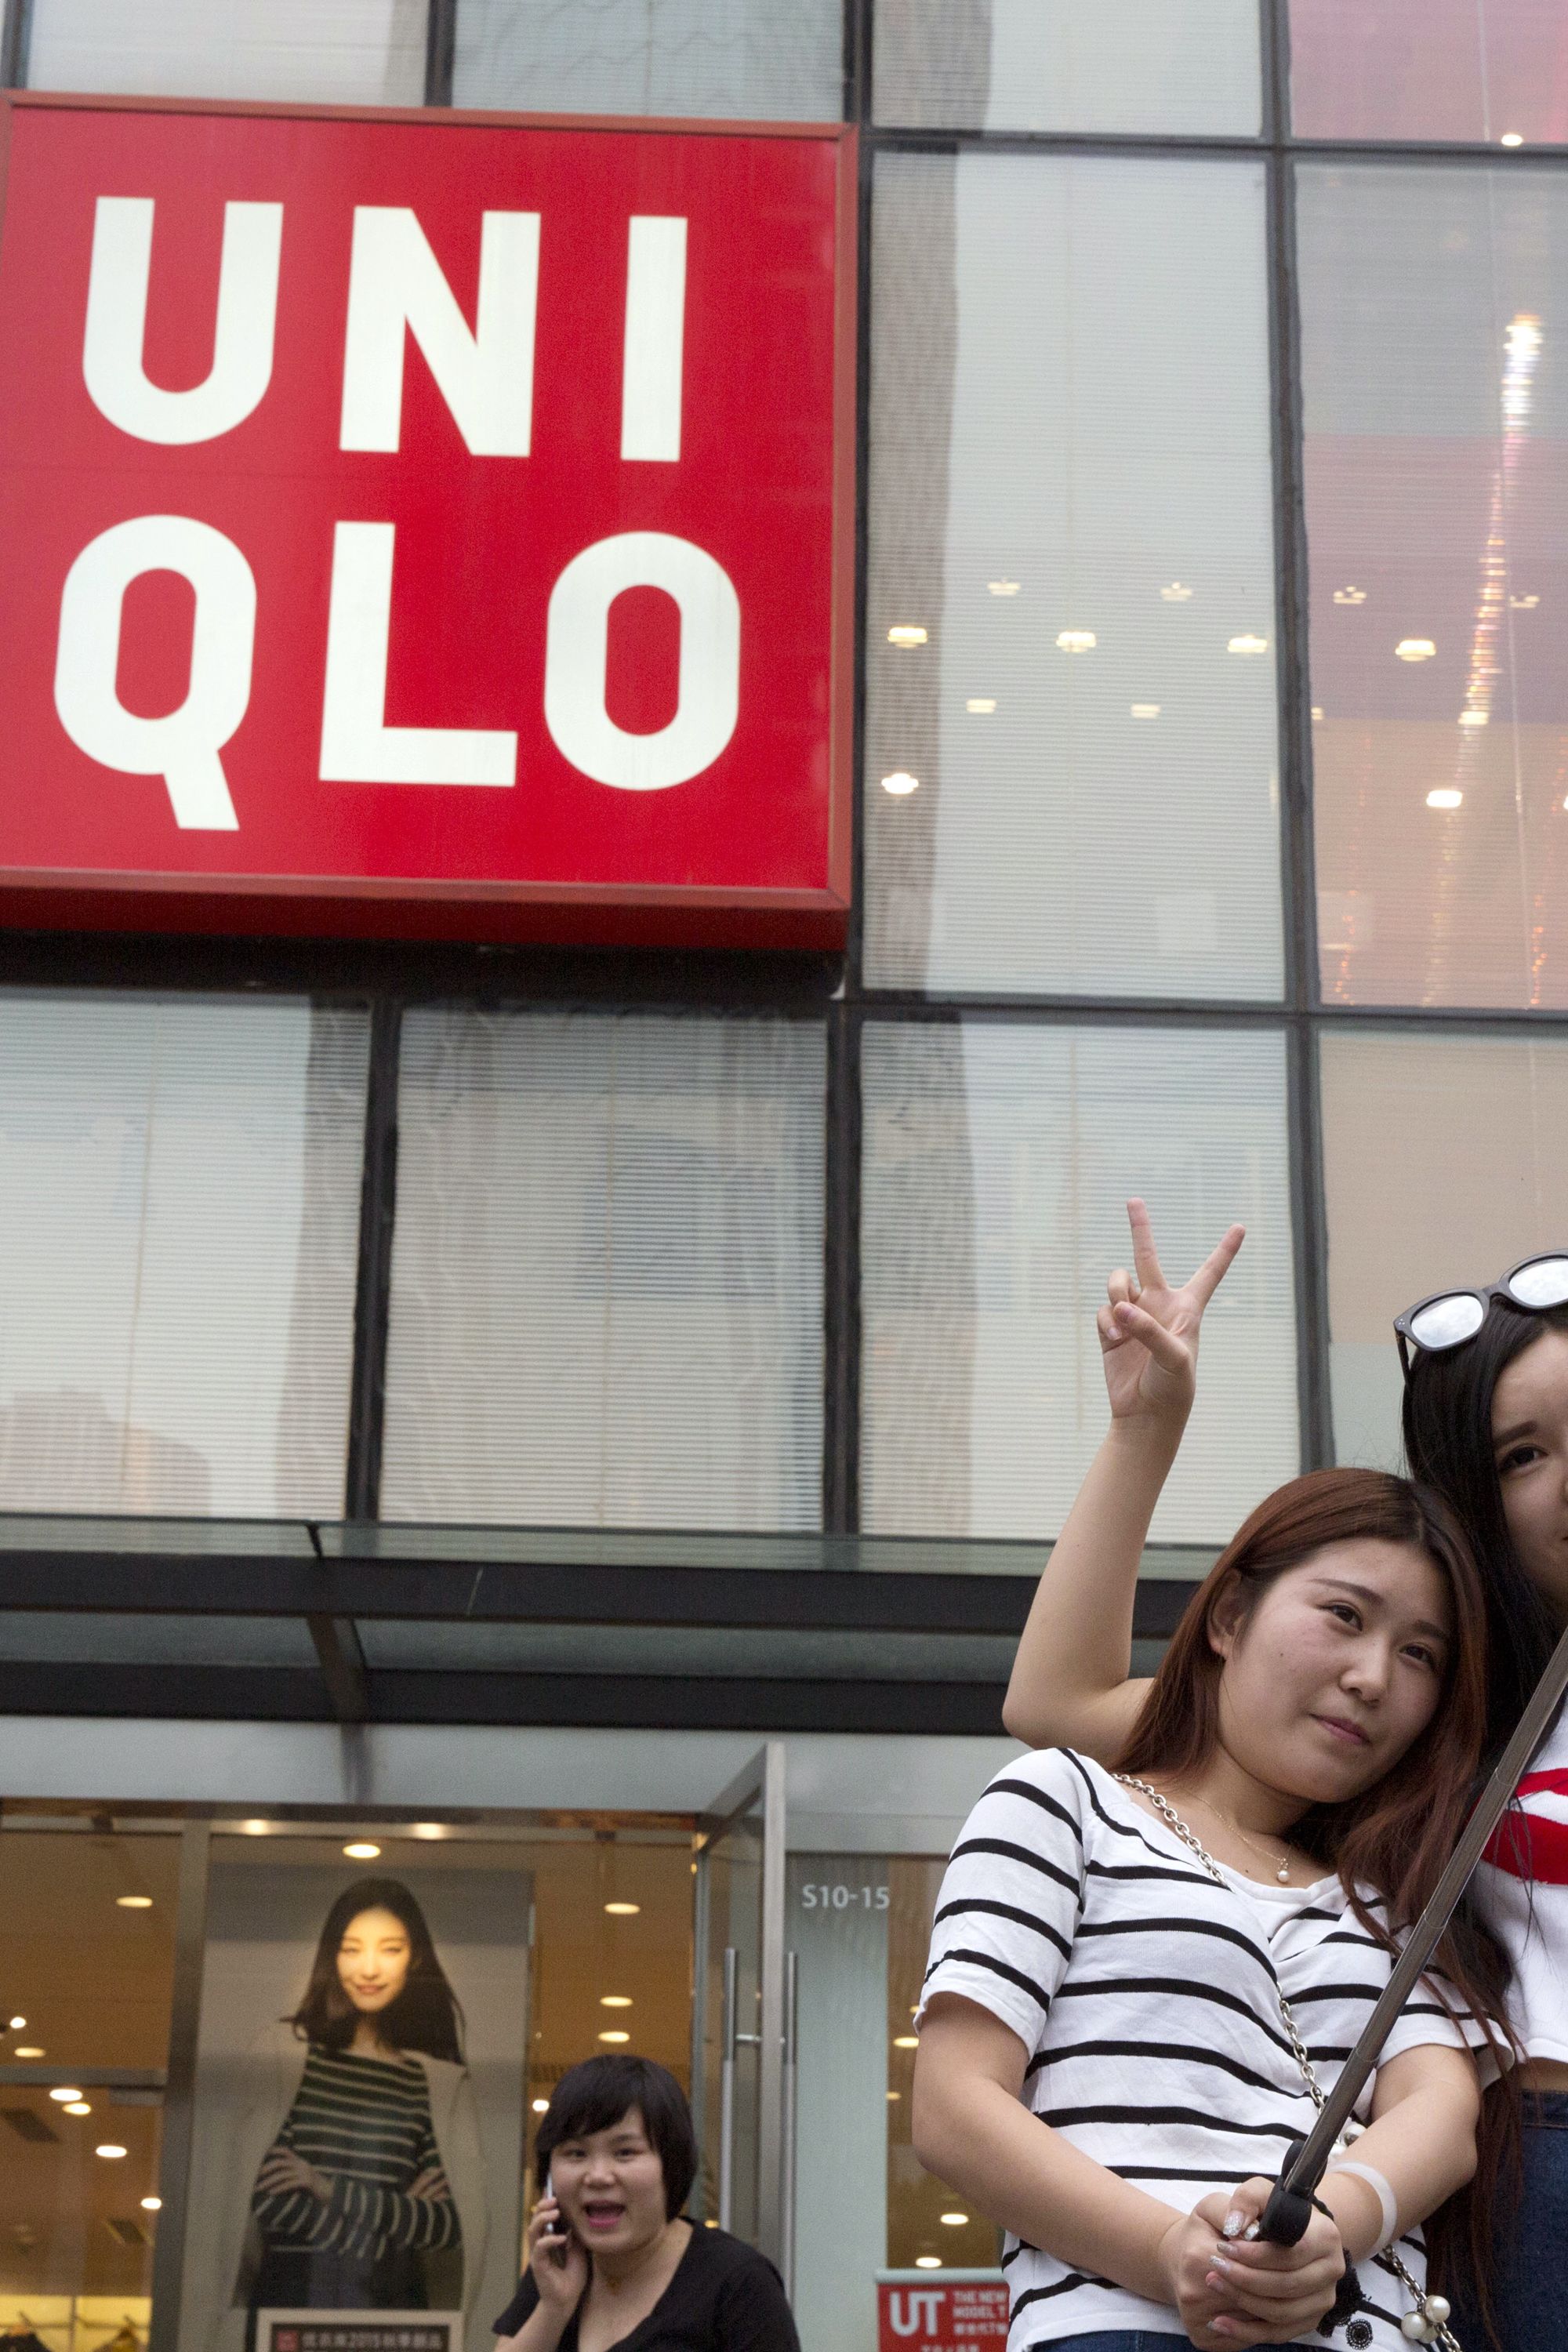 Cheen Sexy Video - Could the Uniqlo sex video be China's sexual 'rebound'? | CNN